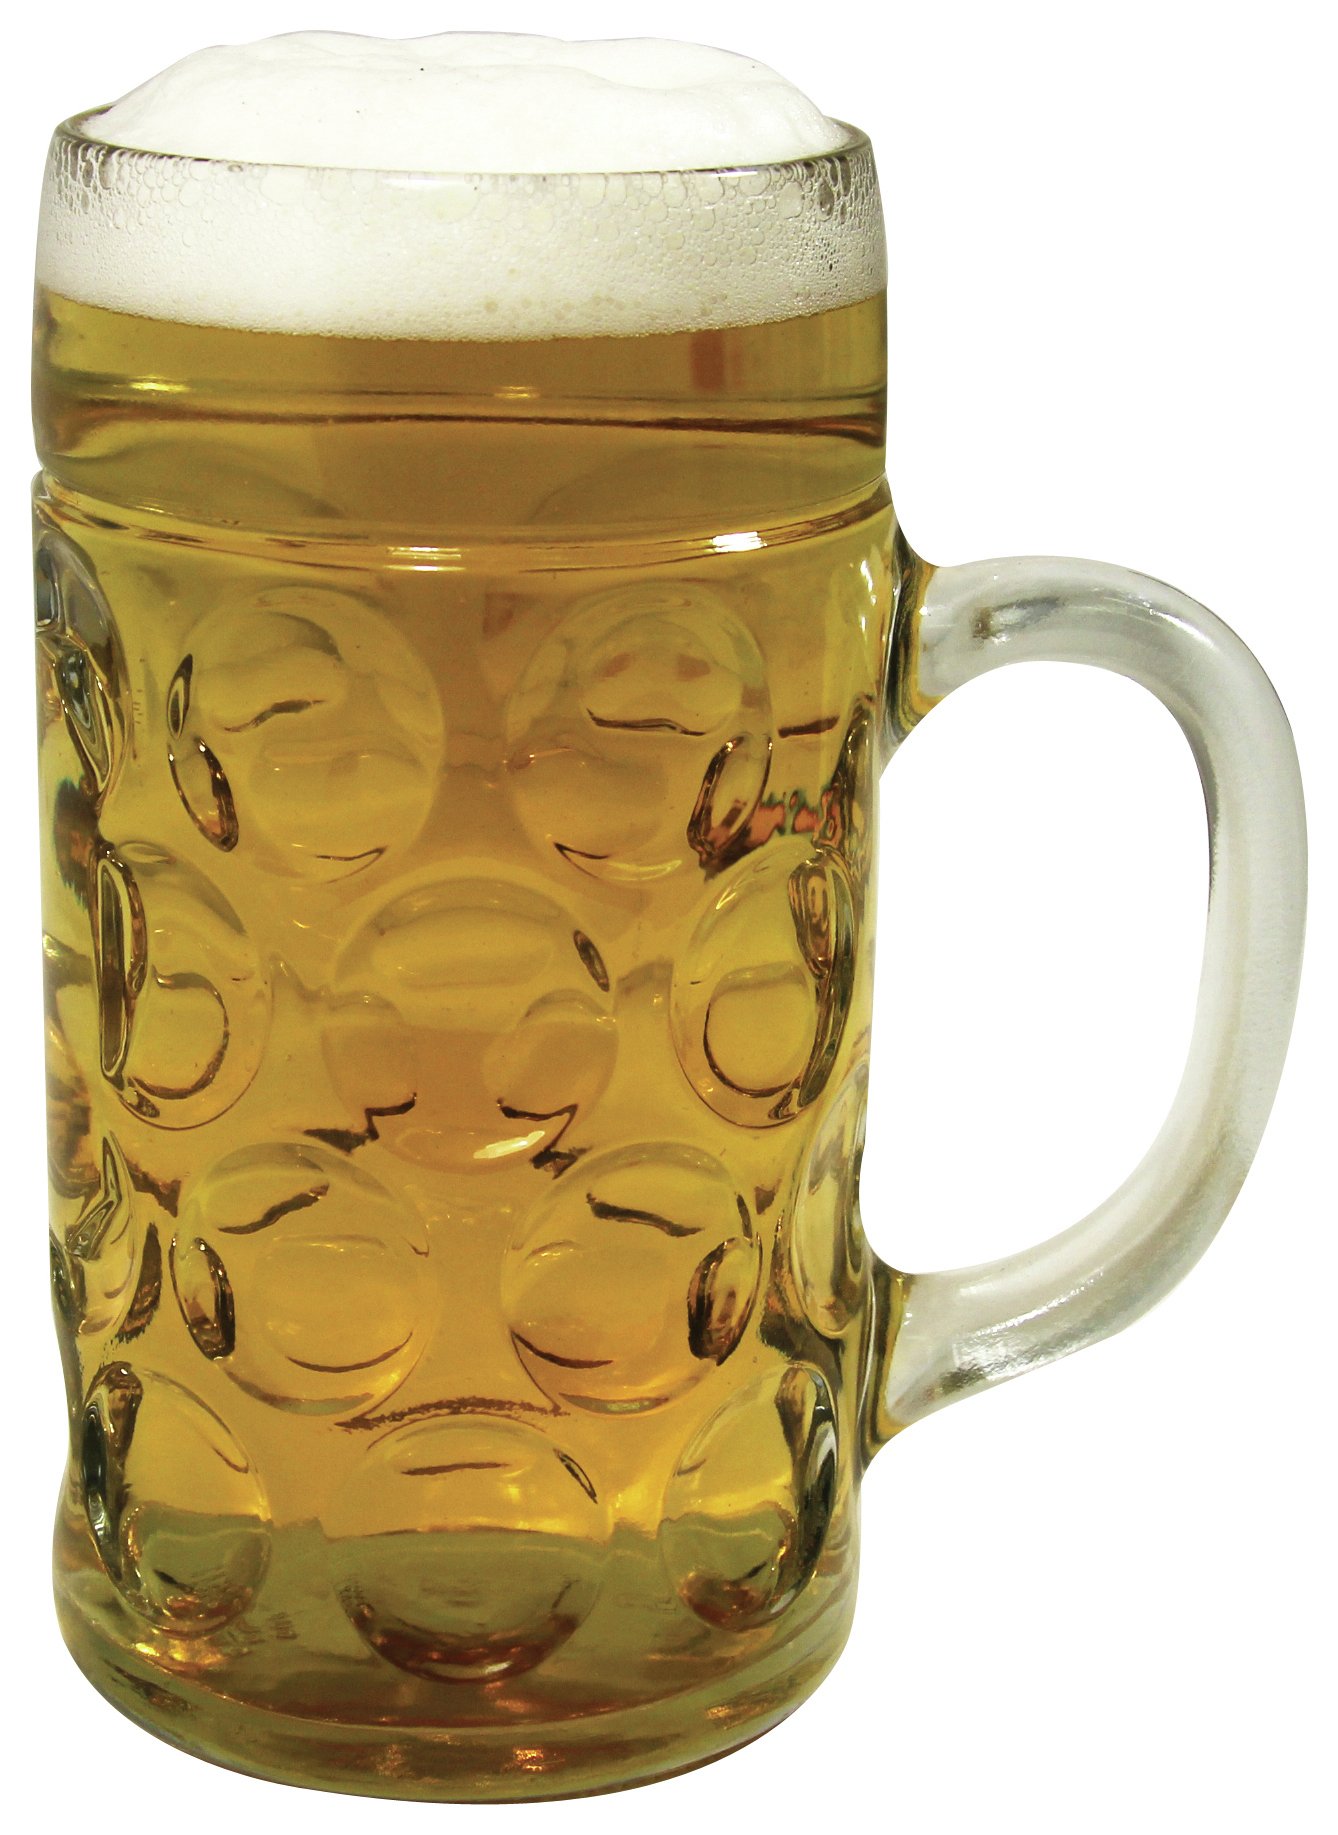 Giant Beer Stein. Review